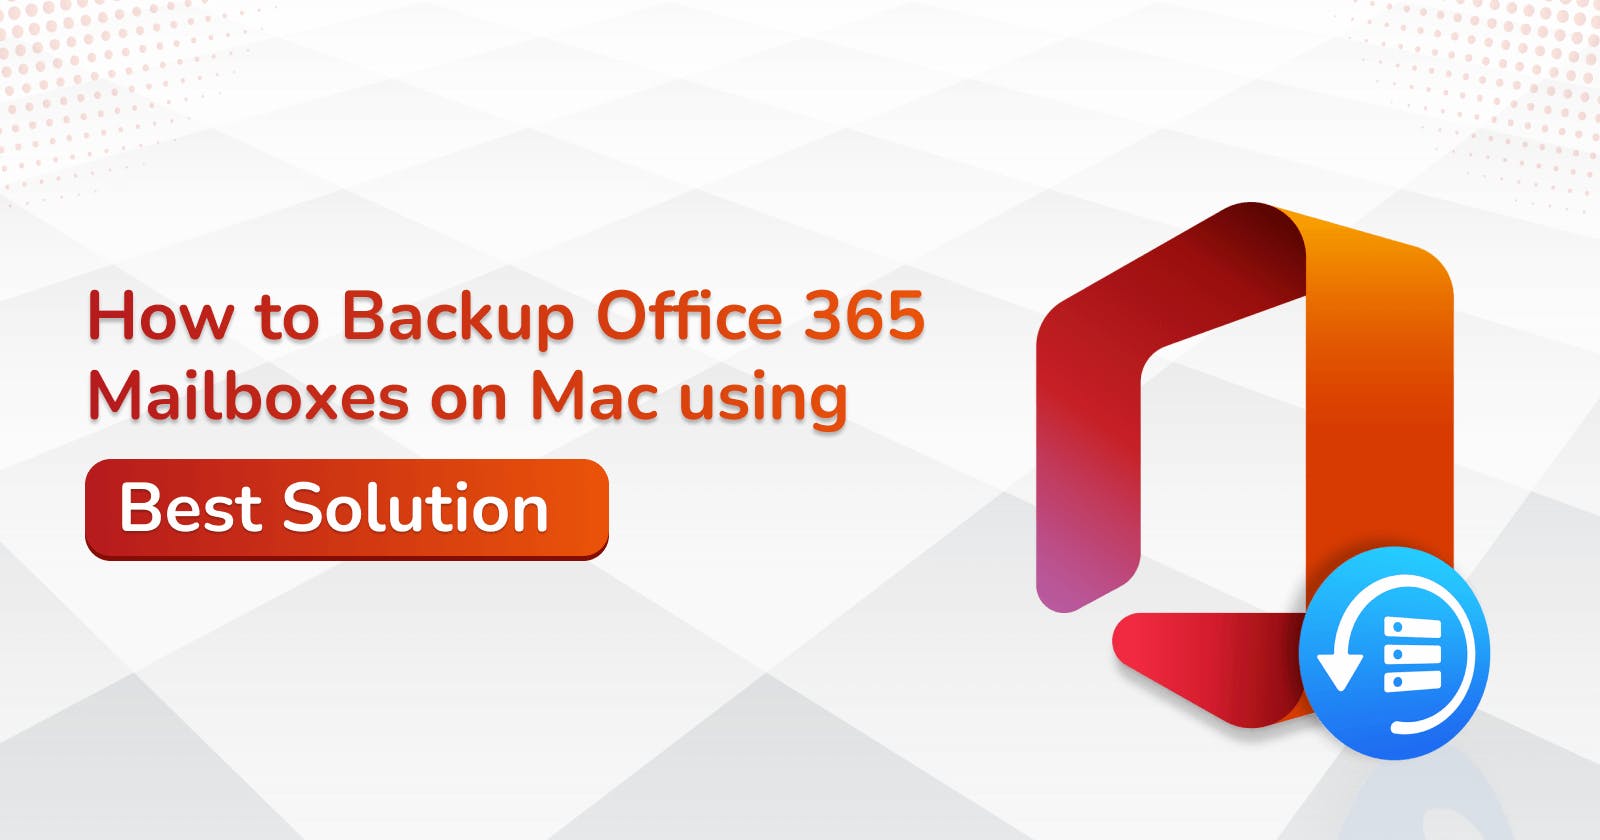 How to Backup Office 365 Mailboxes on Mac using Best Solution